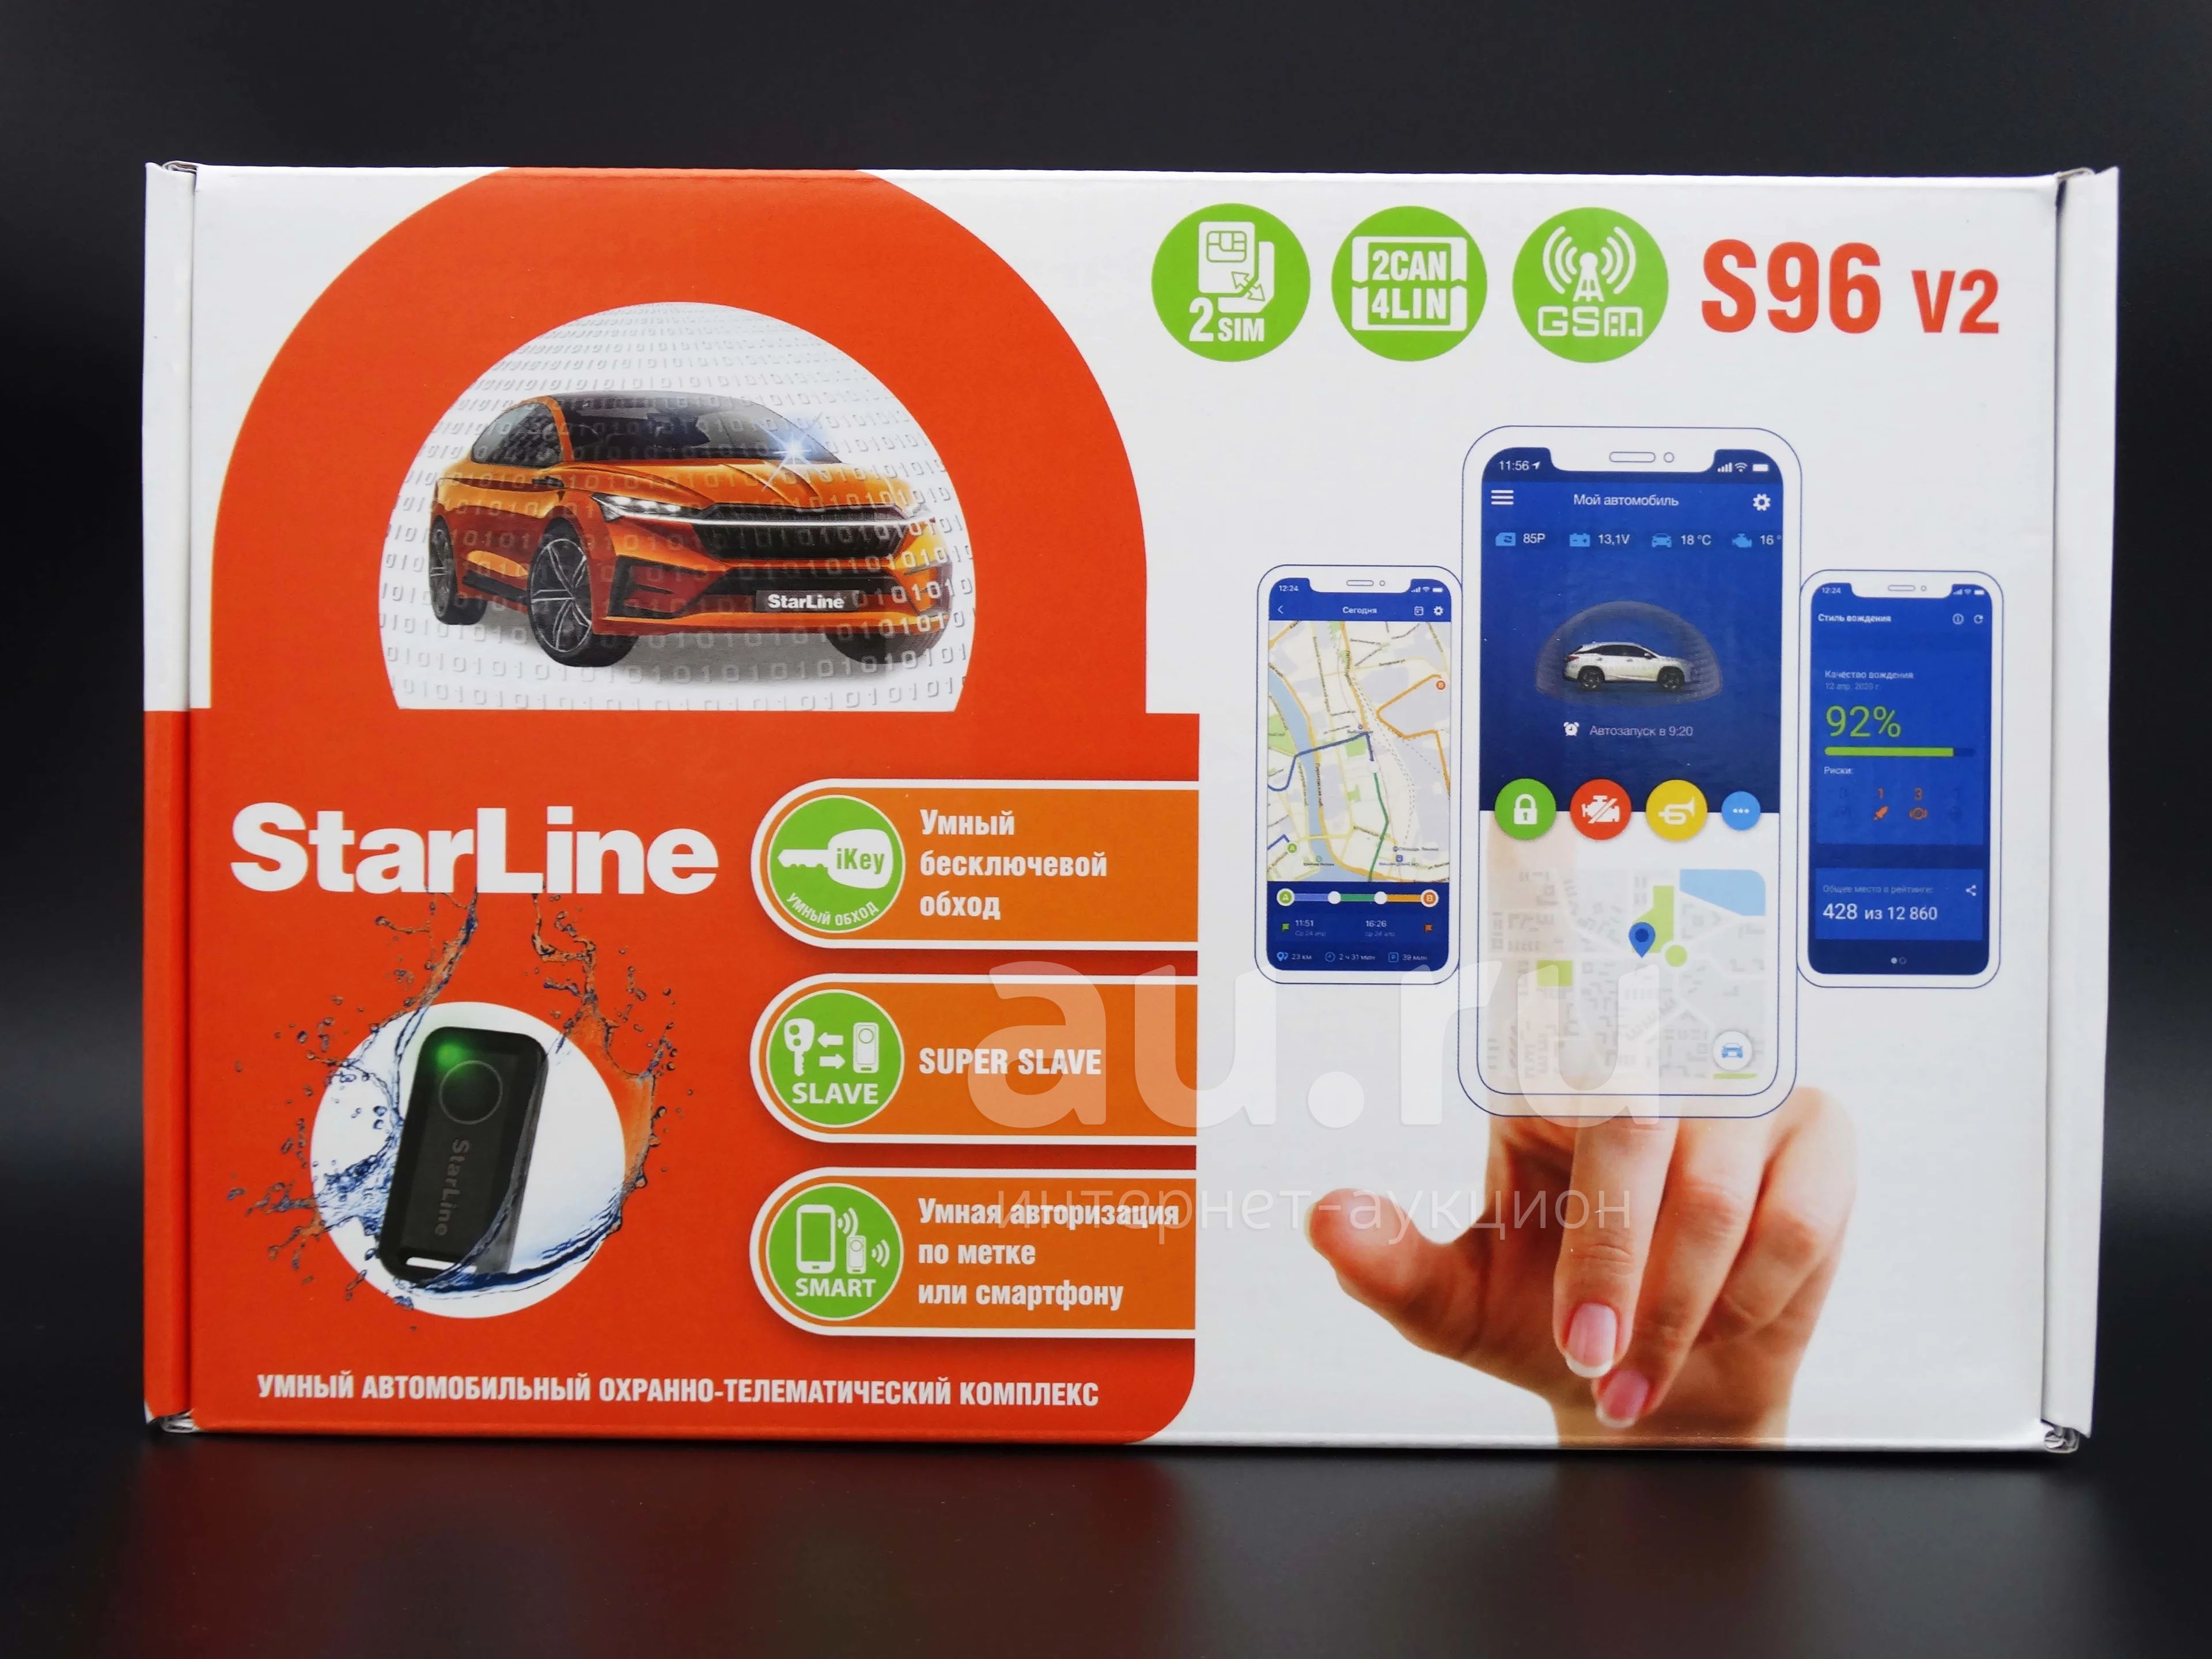 Starline 2can 2lin gsm. Старлайн s96 v2. Старлайн s96 v2 GSM. STARLINE s96 v2 BT GSM 2sim. STARLINE s96 v2 2can+4lin 2sim GSM.